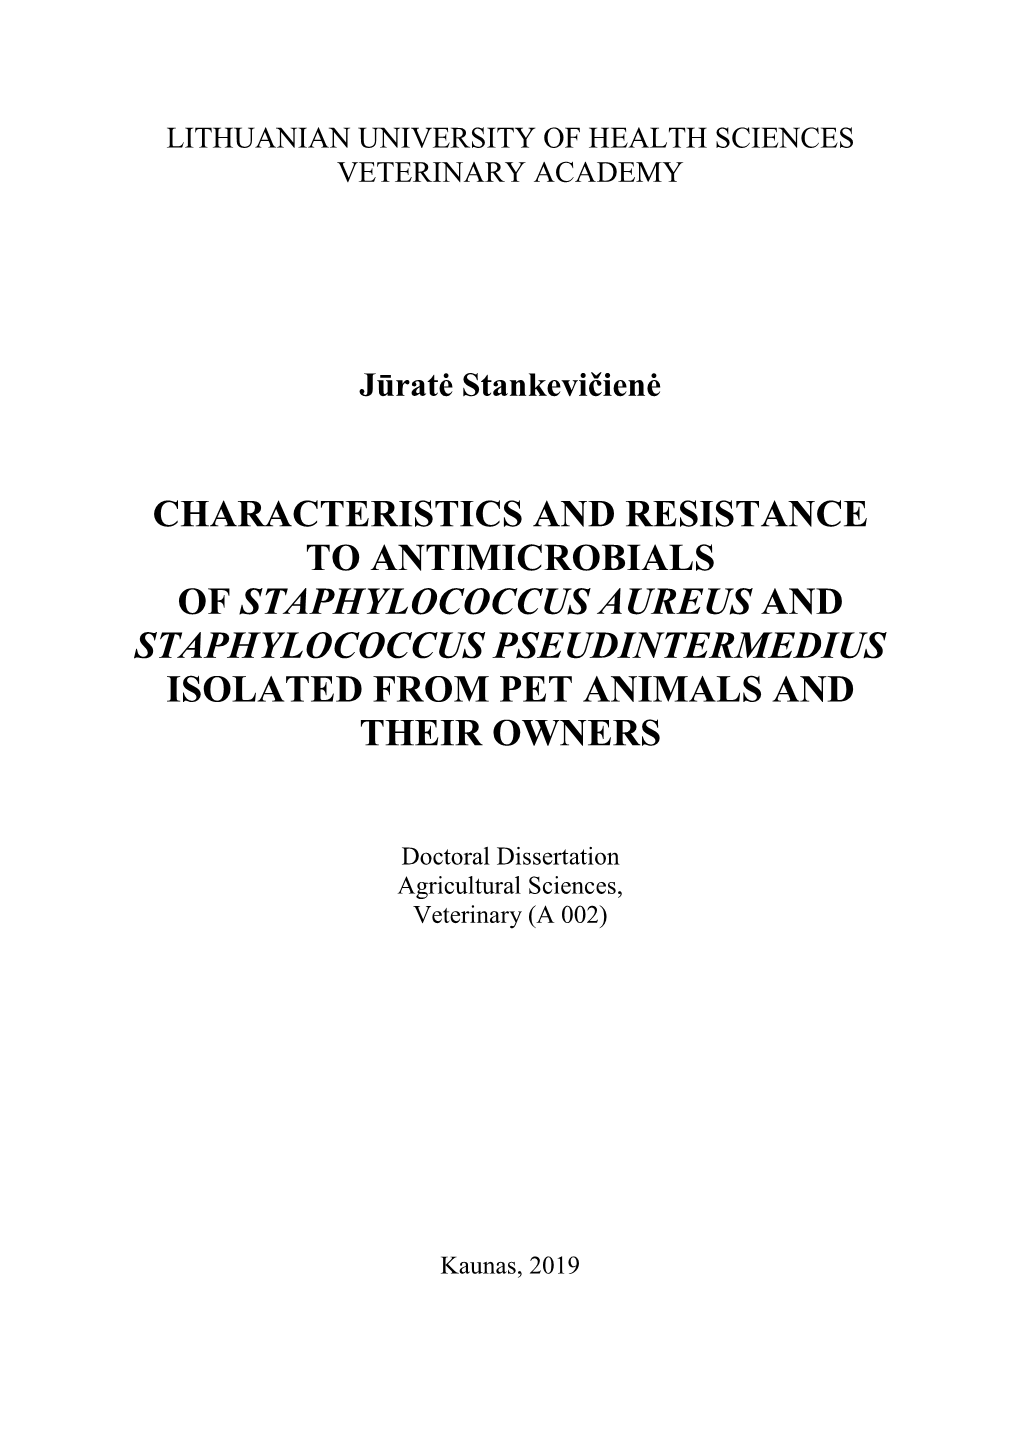 Characteristics and Resistance to Antimicrobials of Staphylococcus Aureus and Staphylococcus Pseudintermedius Isolated from Pet Animals and Their Owners